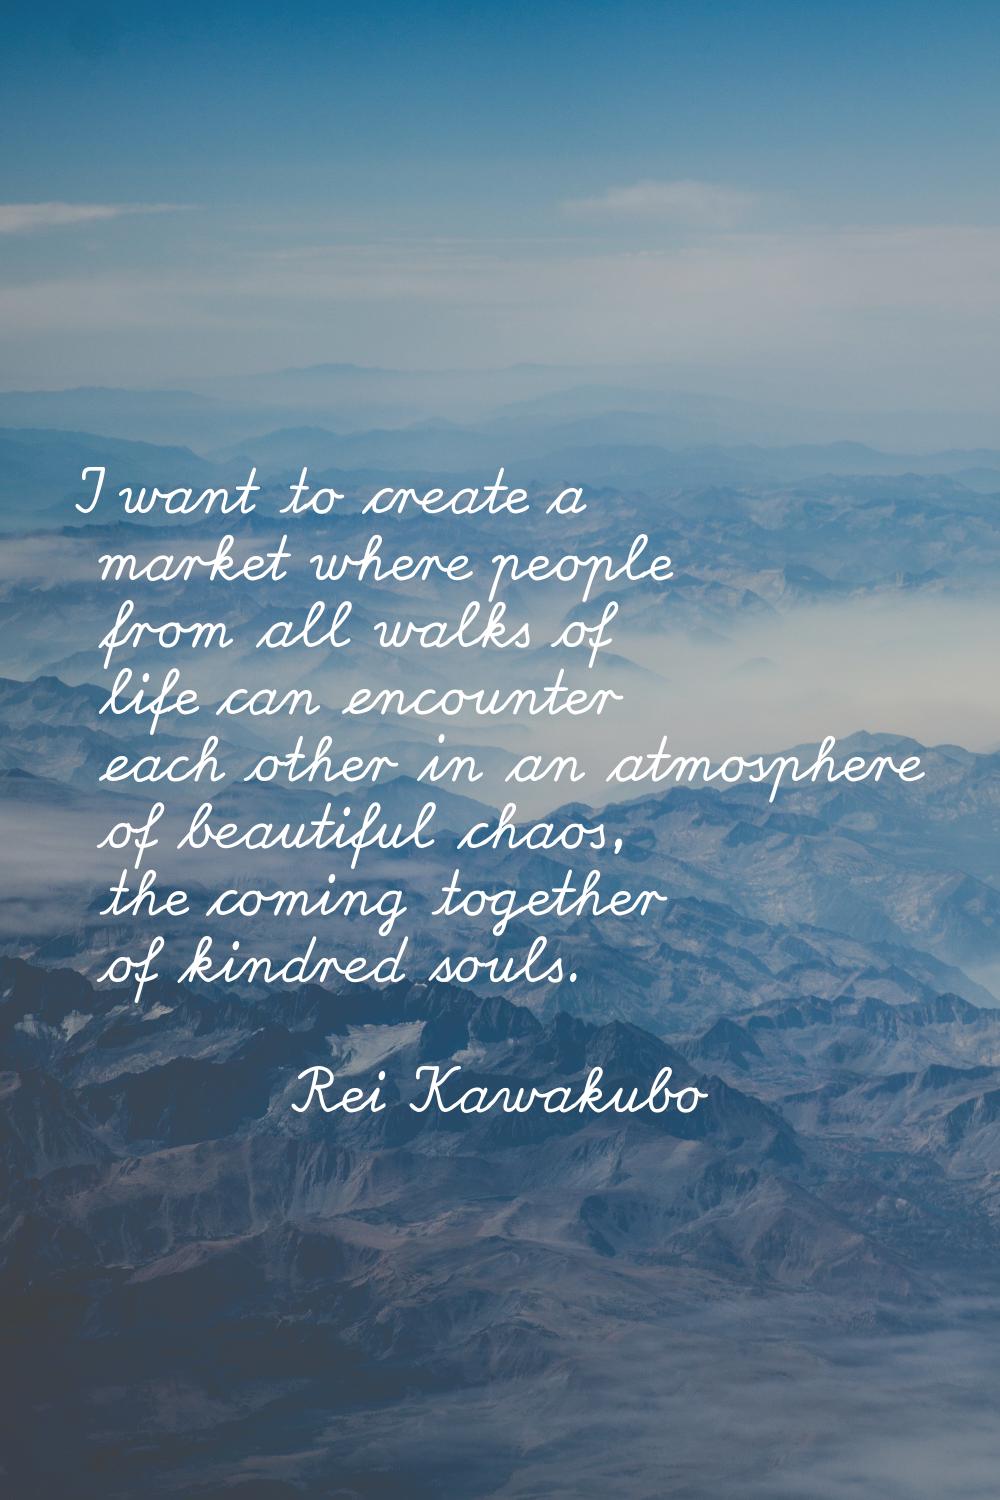 I want to create a market where people from all walks of life can encounter each other in an atmosp